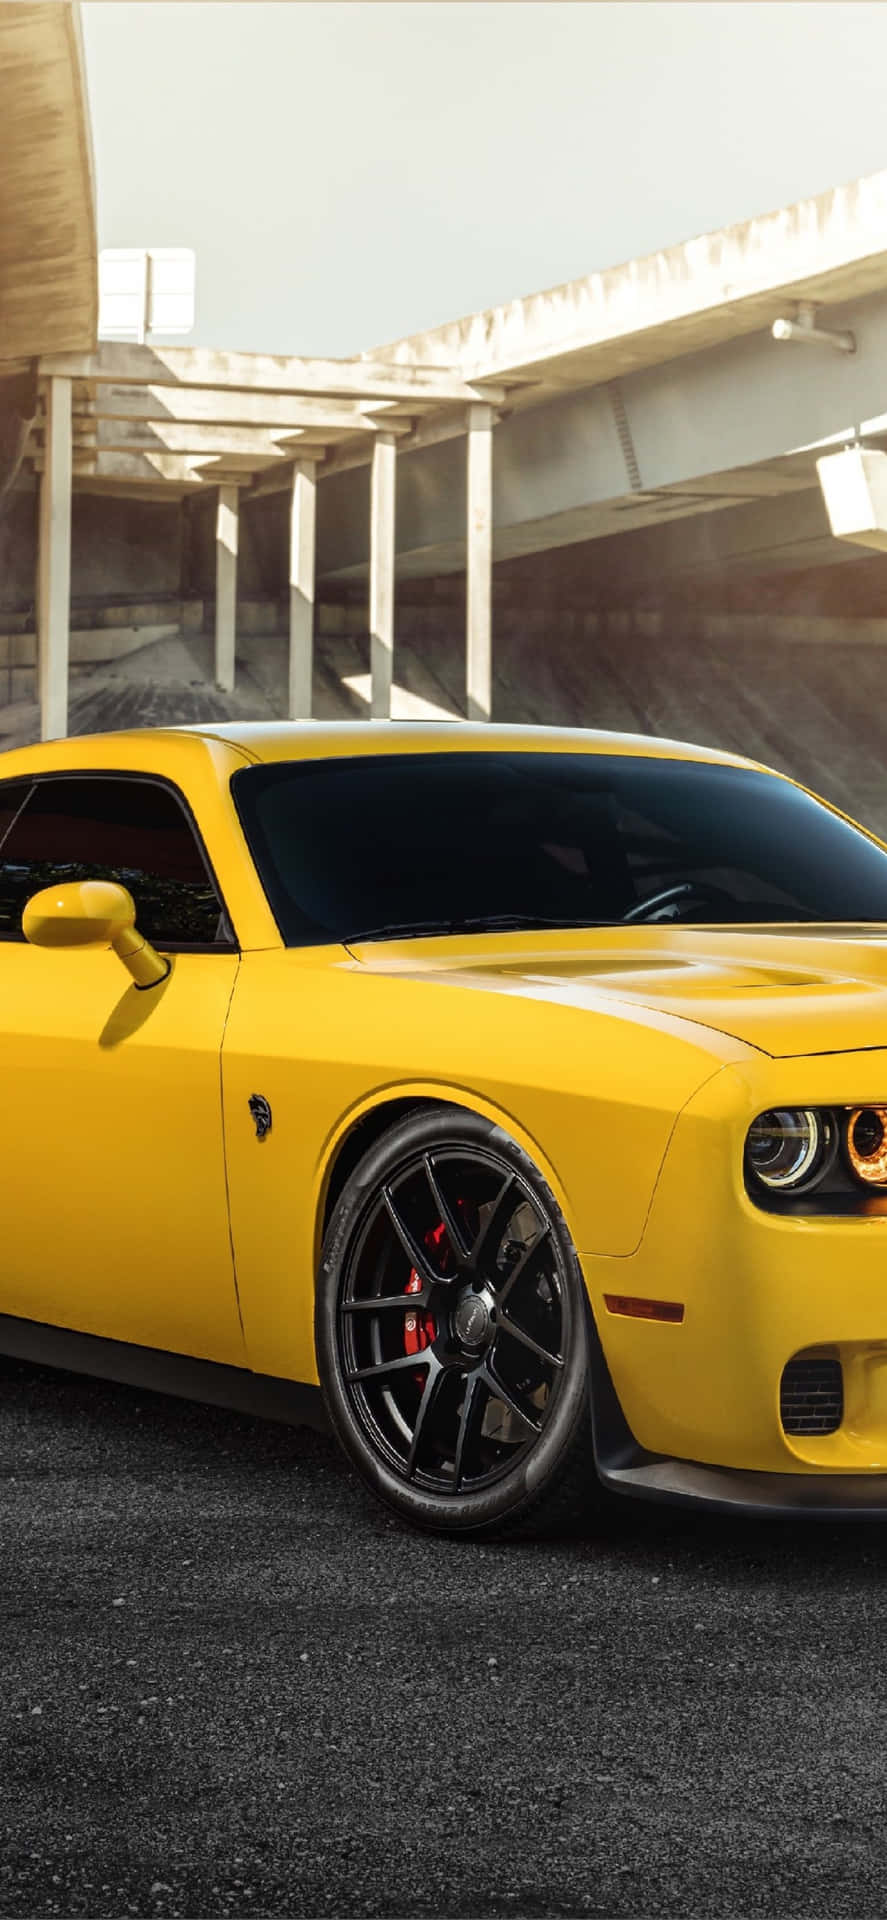 Experience Unparalleled Speed and Performance with the Hellcat iPhone Wallpaper